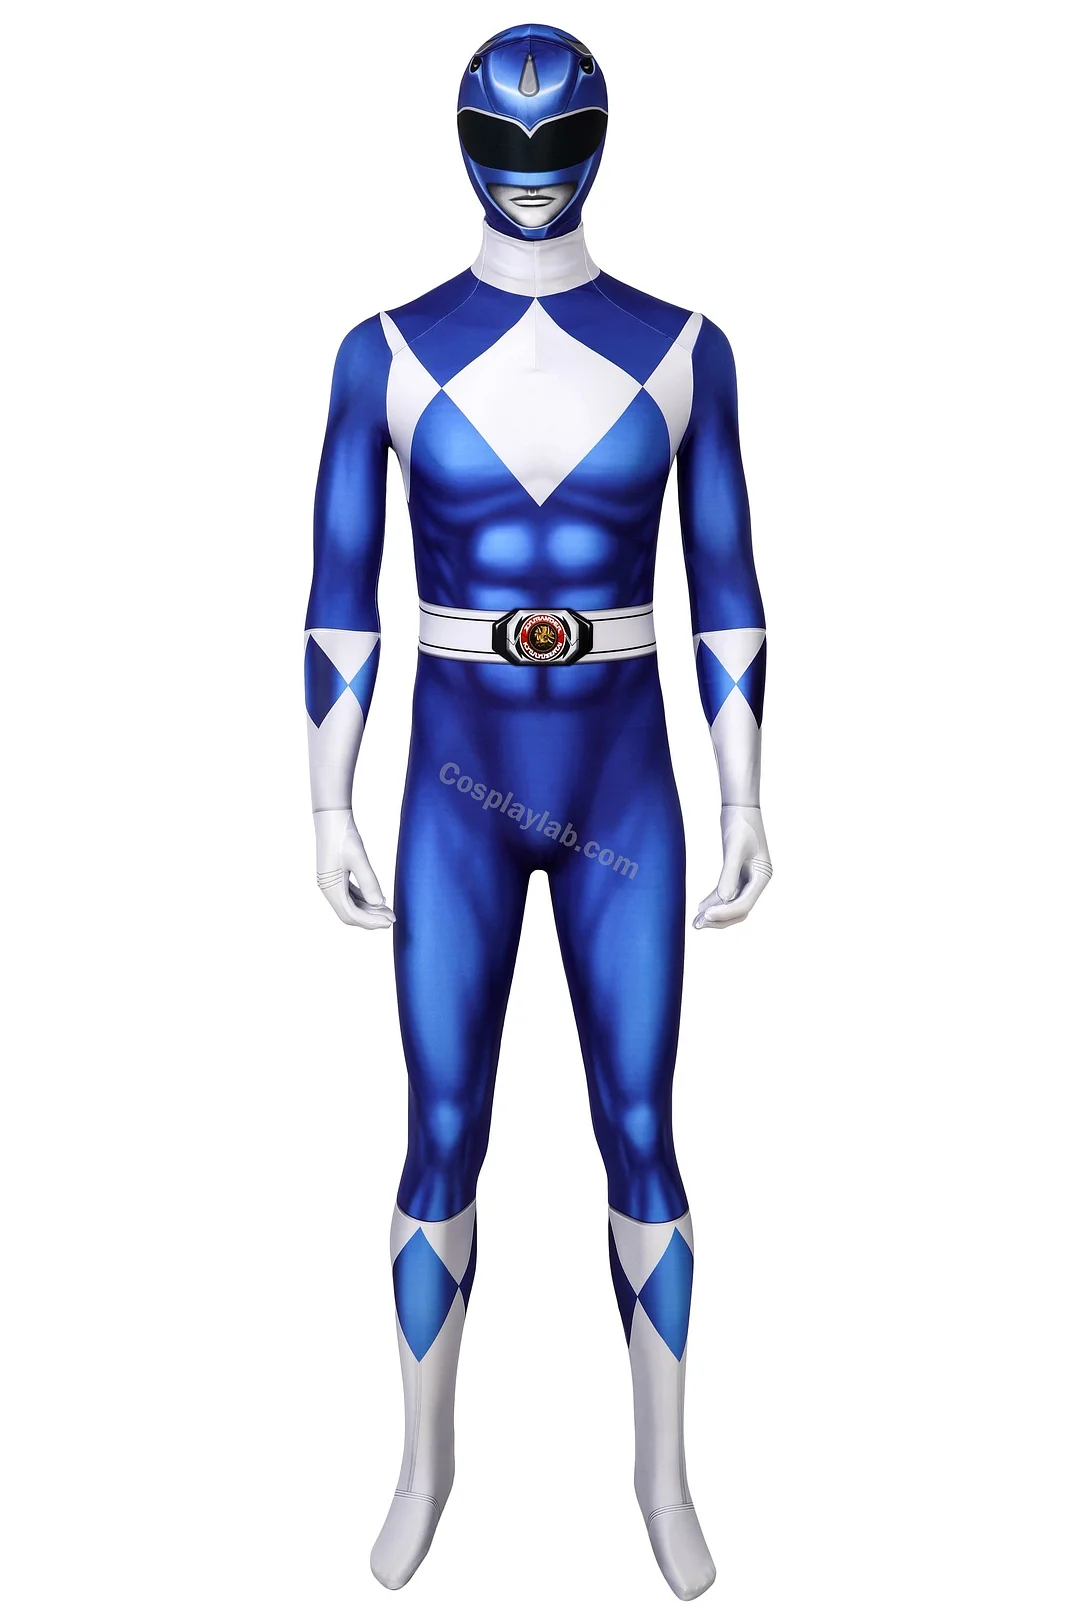 Blue Ranger Cosplay Suit Power Rangers Blue HQ Printed Spandex Costume By CosplayLab